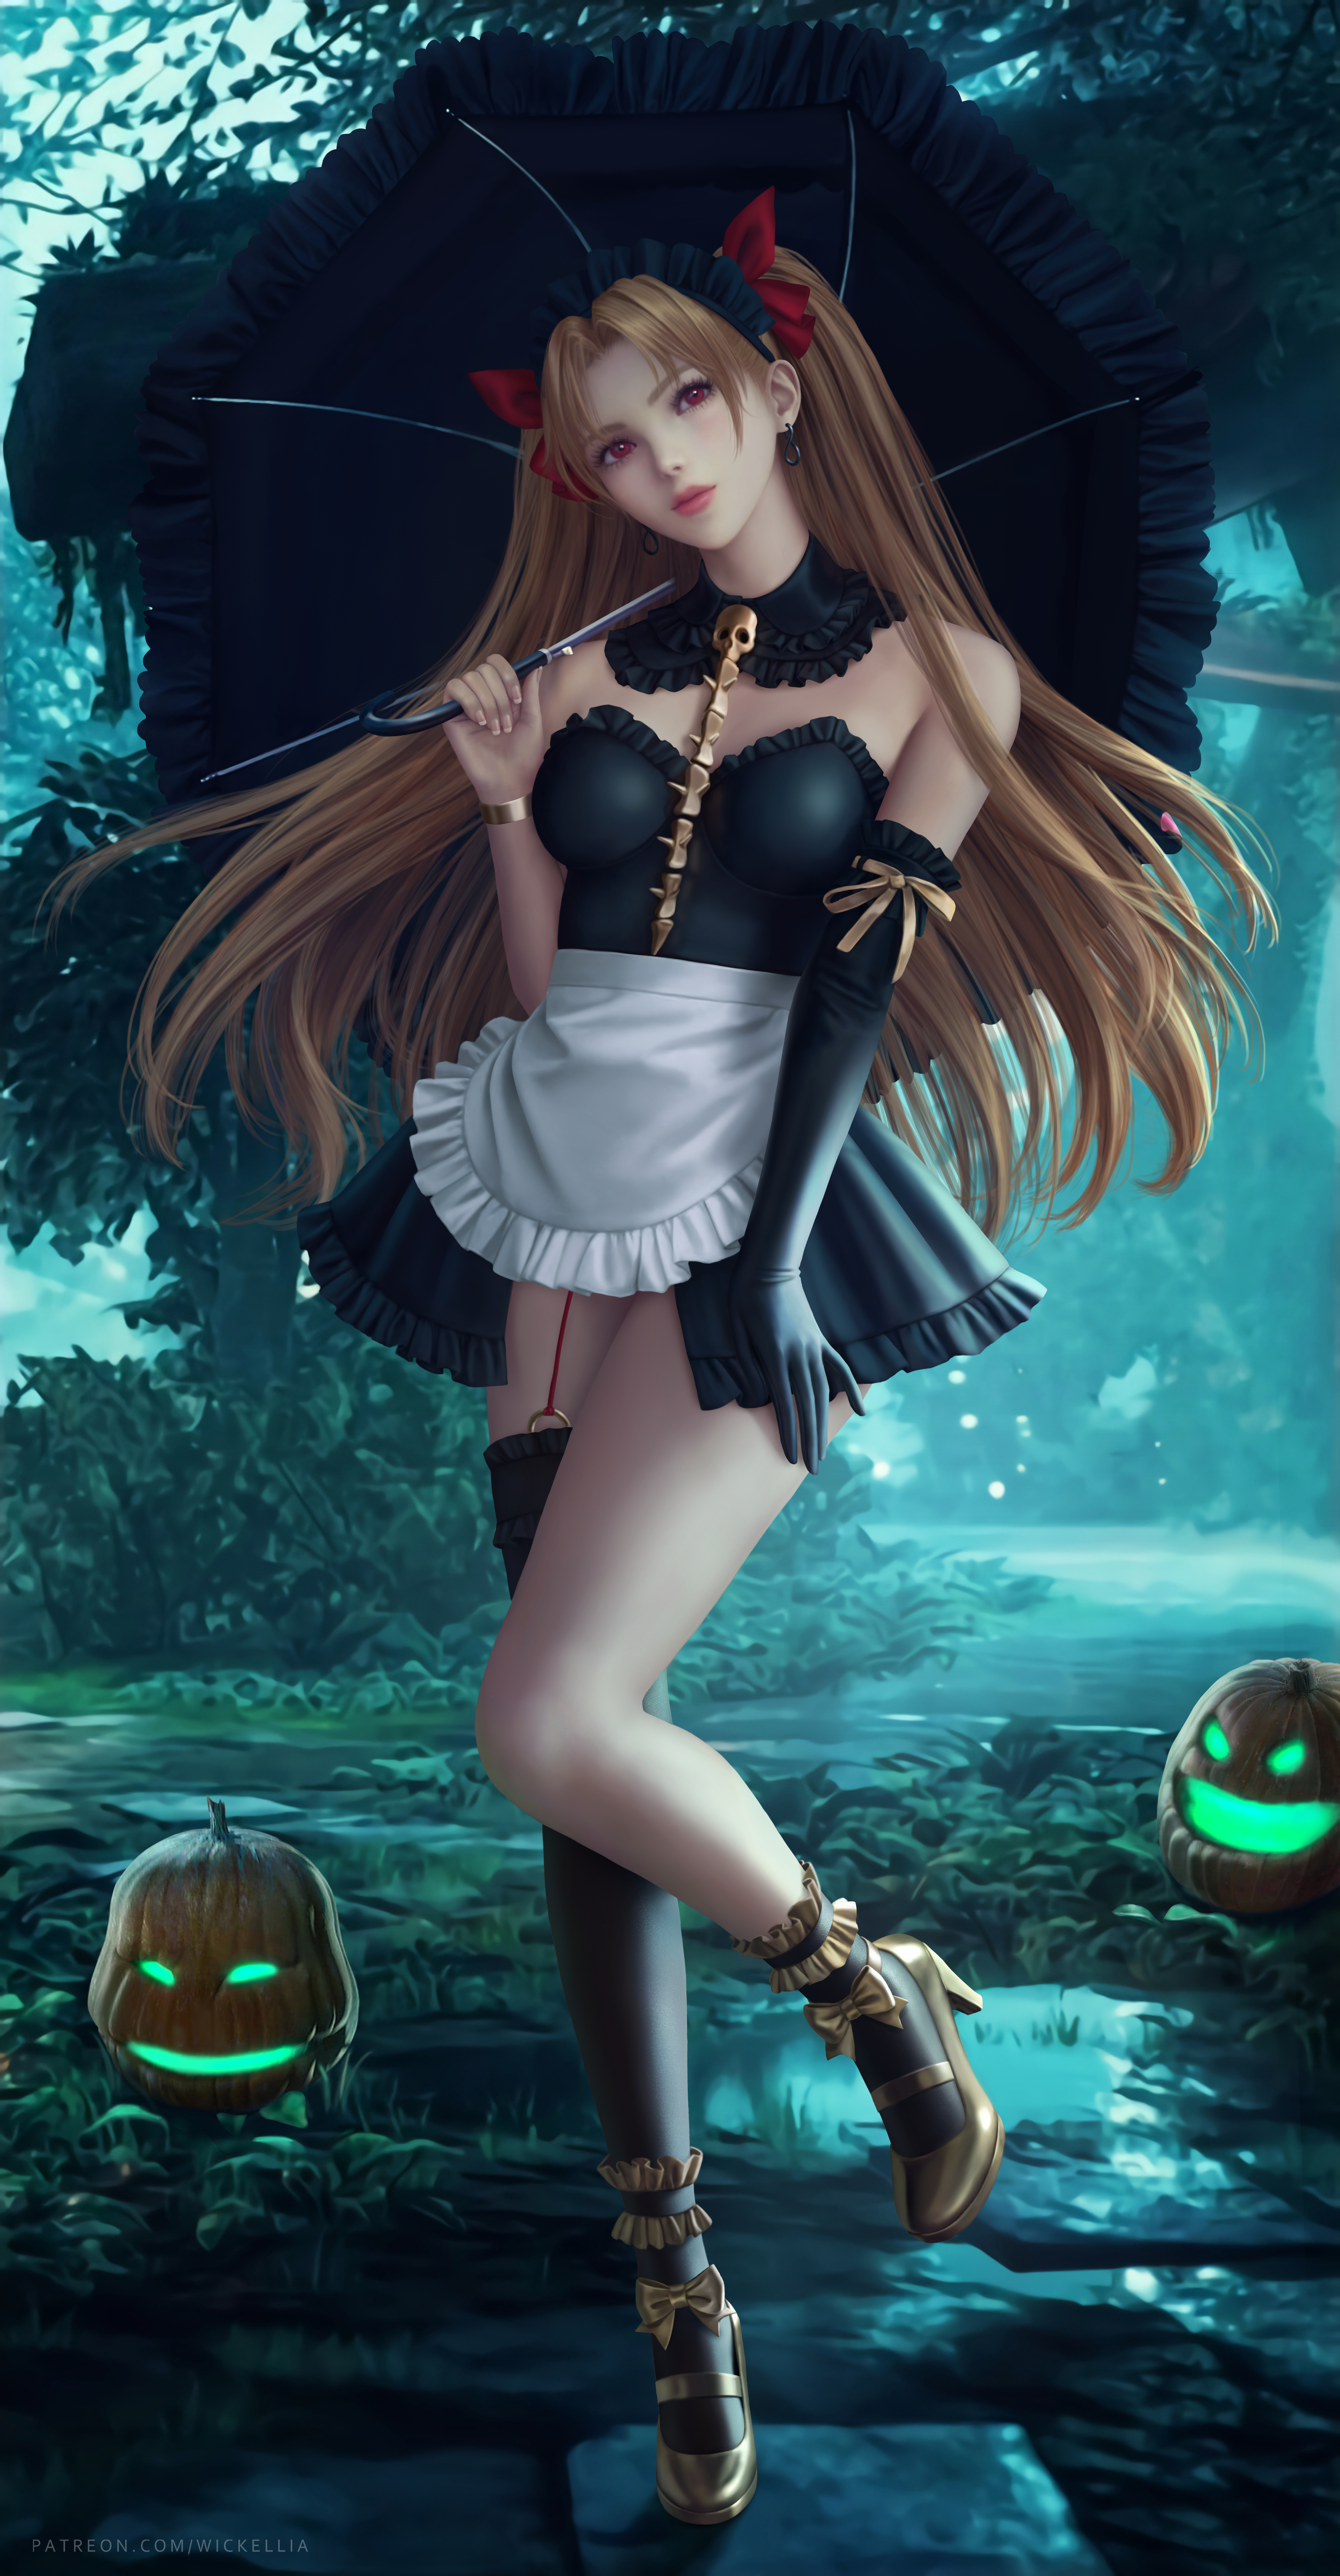 Anime 3900x7500 Ereshkigal (Fate/Grand Order) Fate/Grand Order anime anime girls twintails umbrella dress maid outfit maid stockings garter straps 2D artwork drawing fan art Wickellia bare shoulders elbow gloves